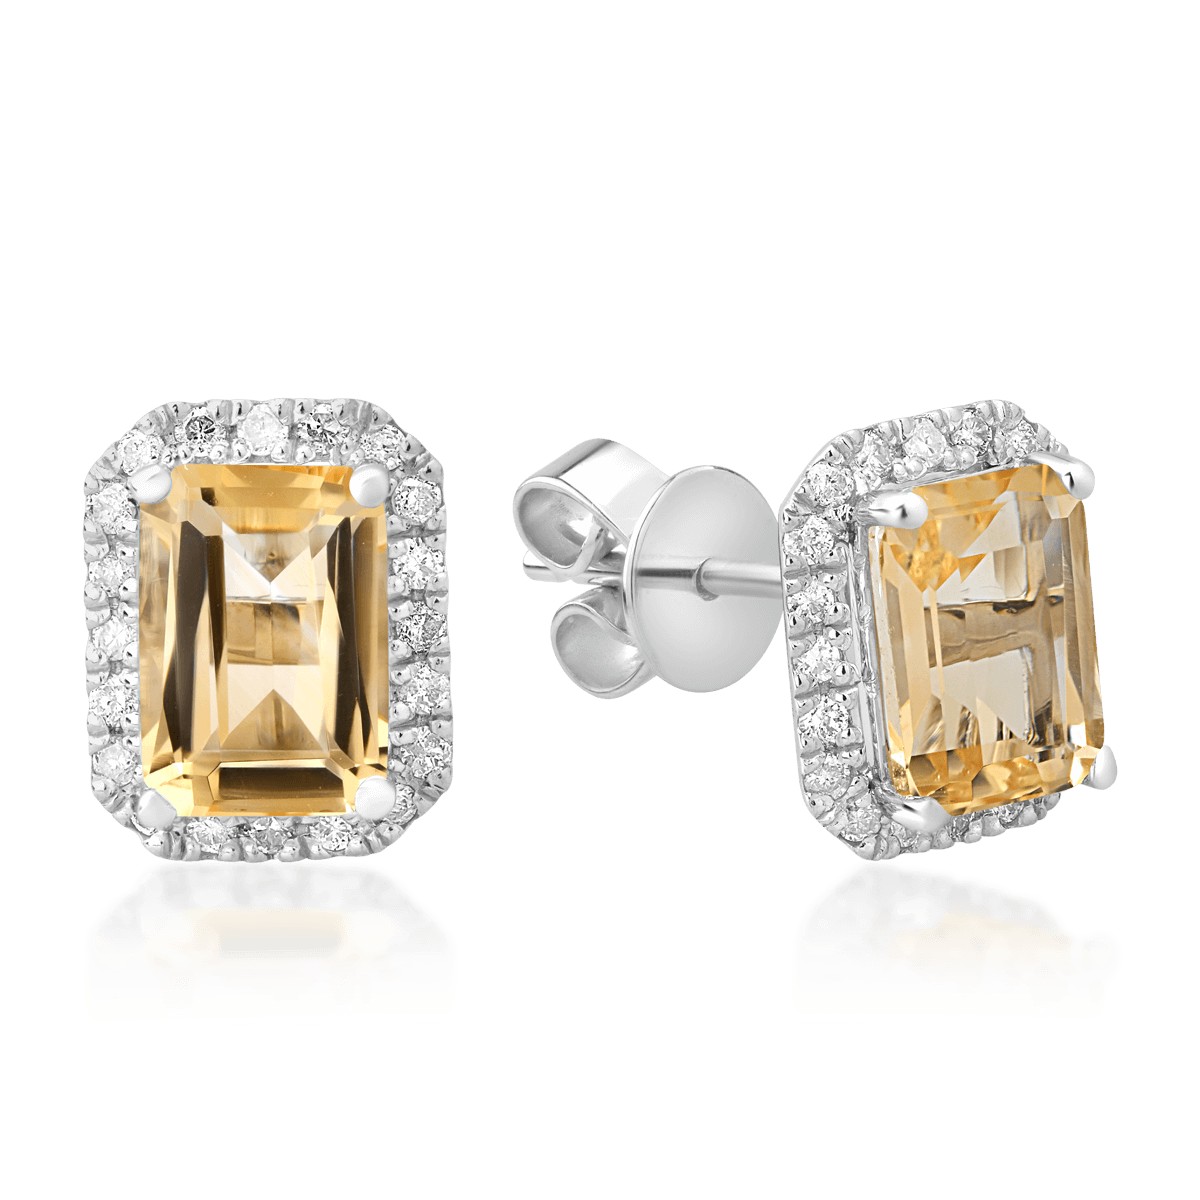 18K white gold earrings with citrines of 1.73ct and diamonds of 0.24ct